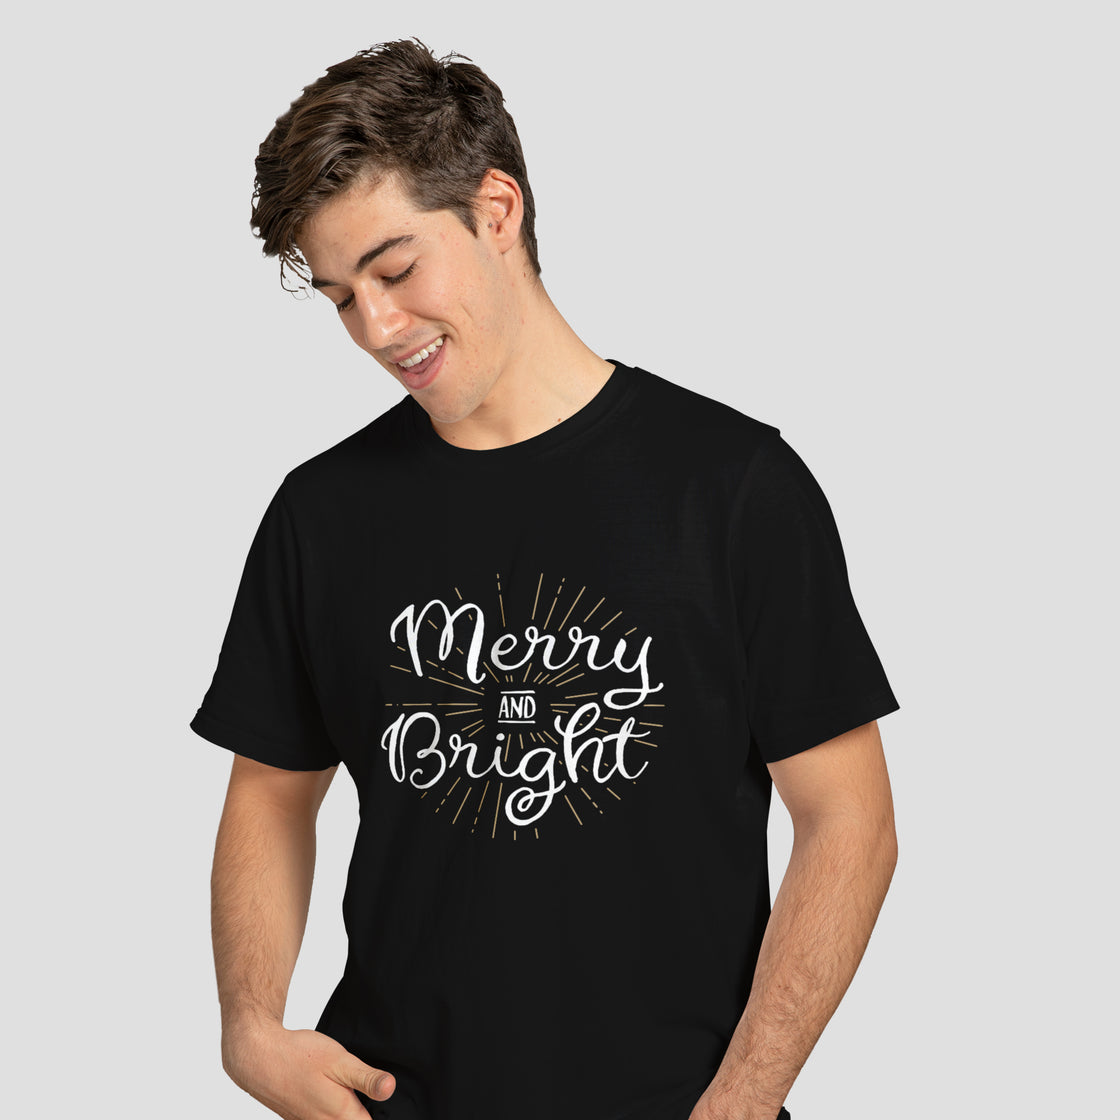 Merry And Bright - T-shirt - Custom Gifts 